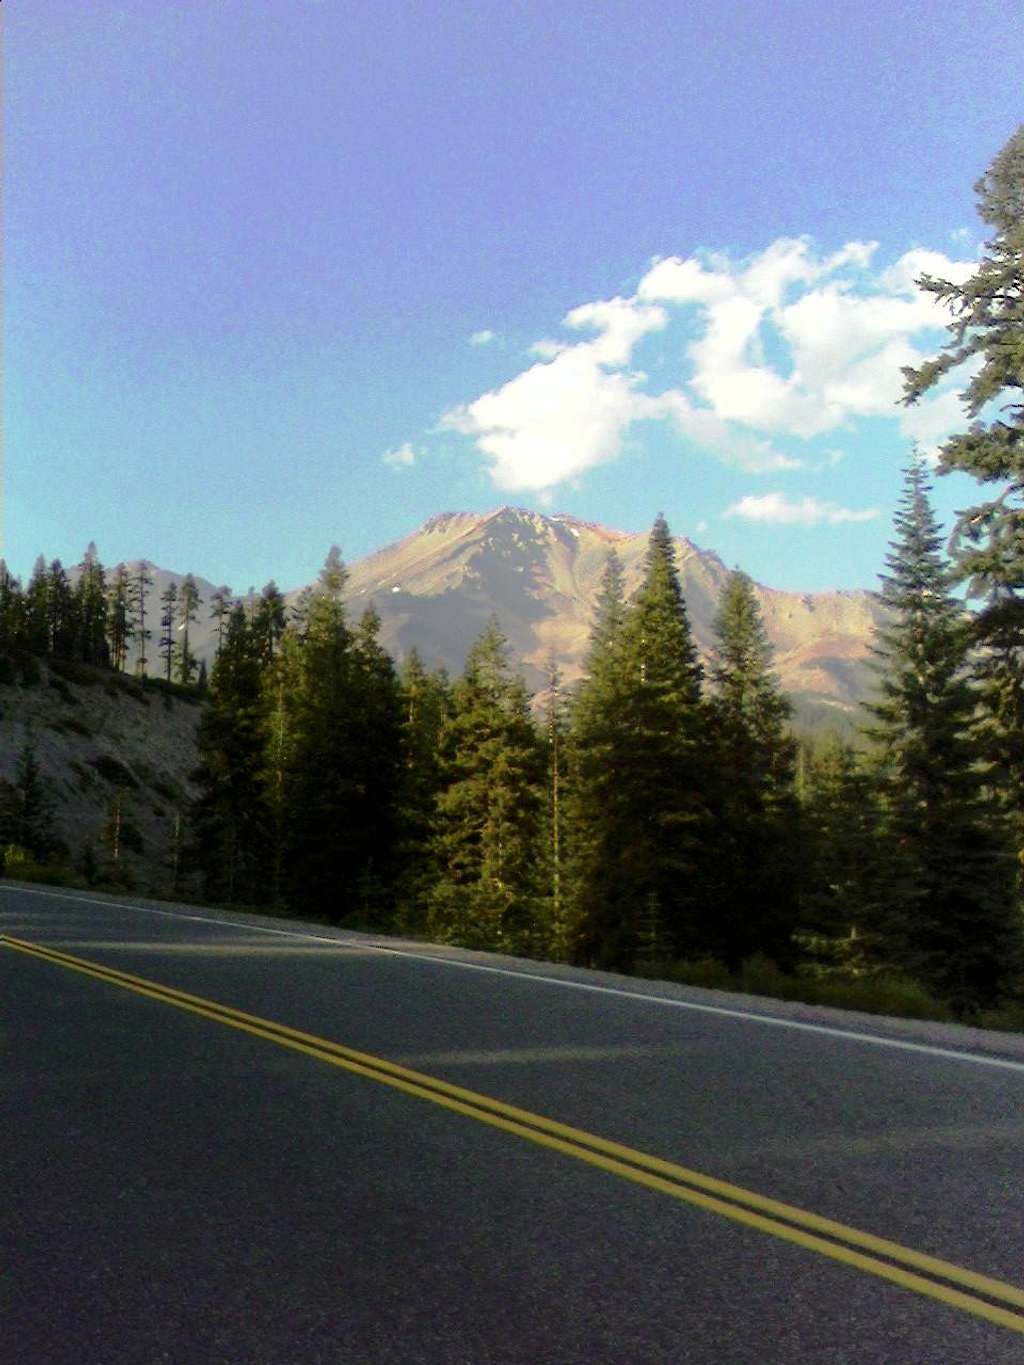 Aug 12, 2008 driving down from trailhead